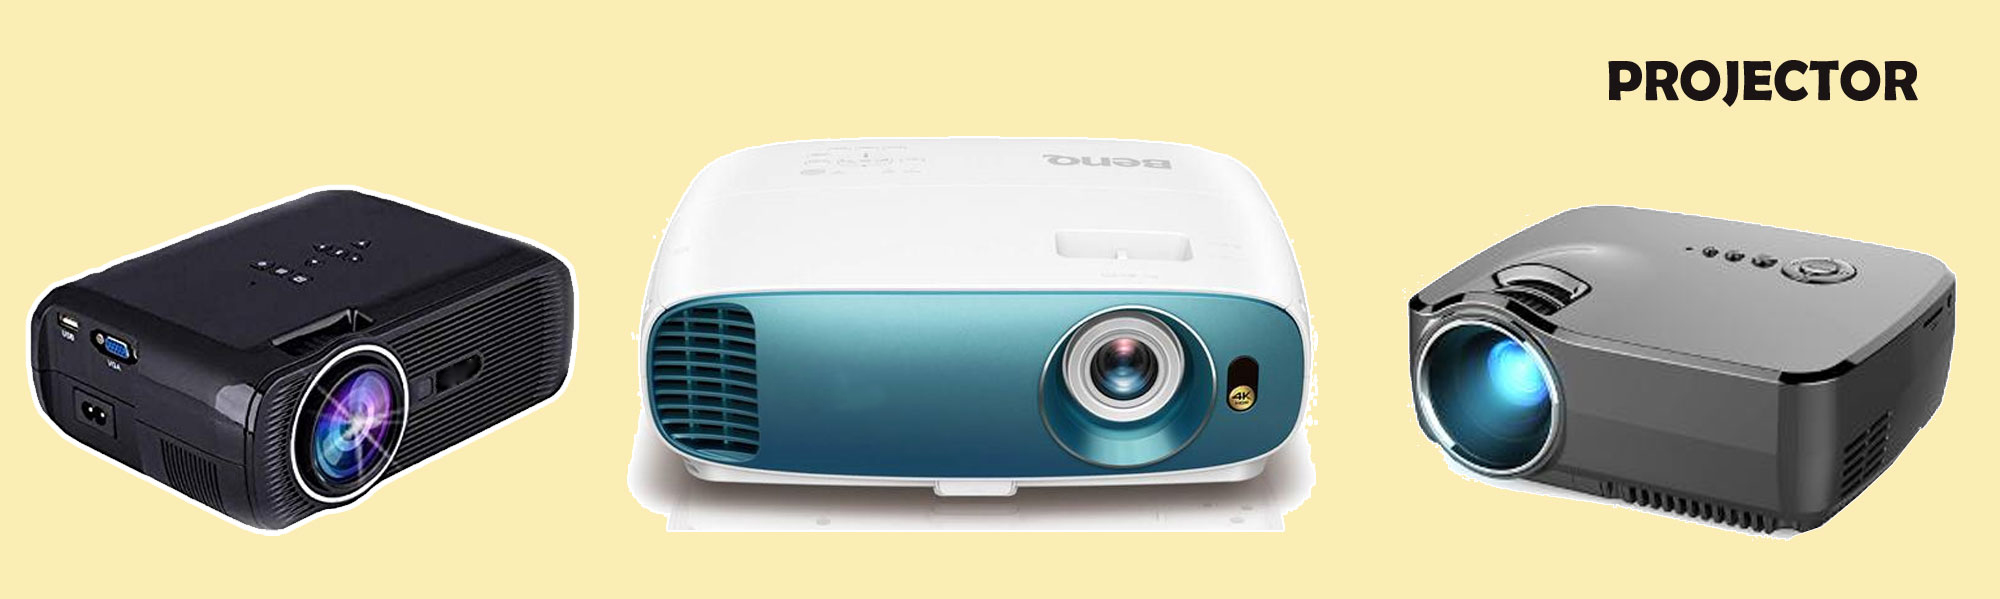 LG projector on Rent